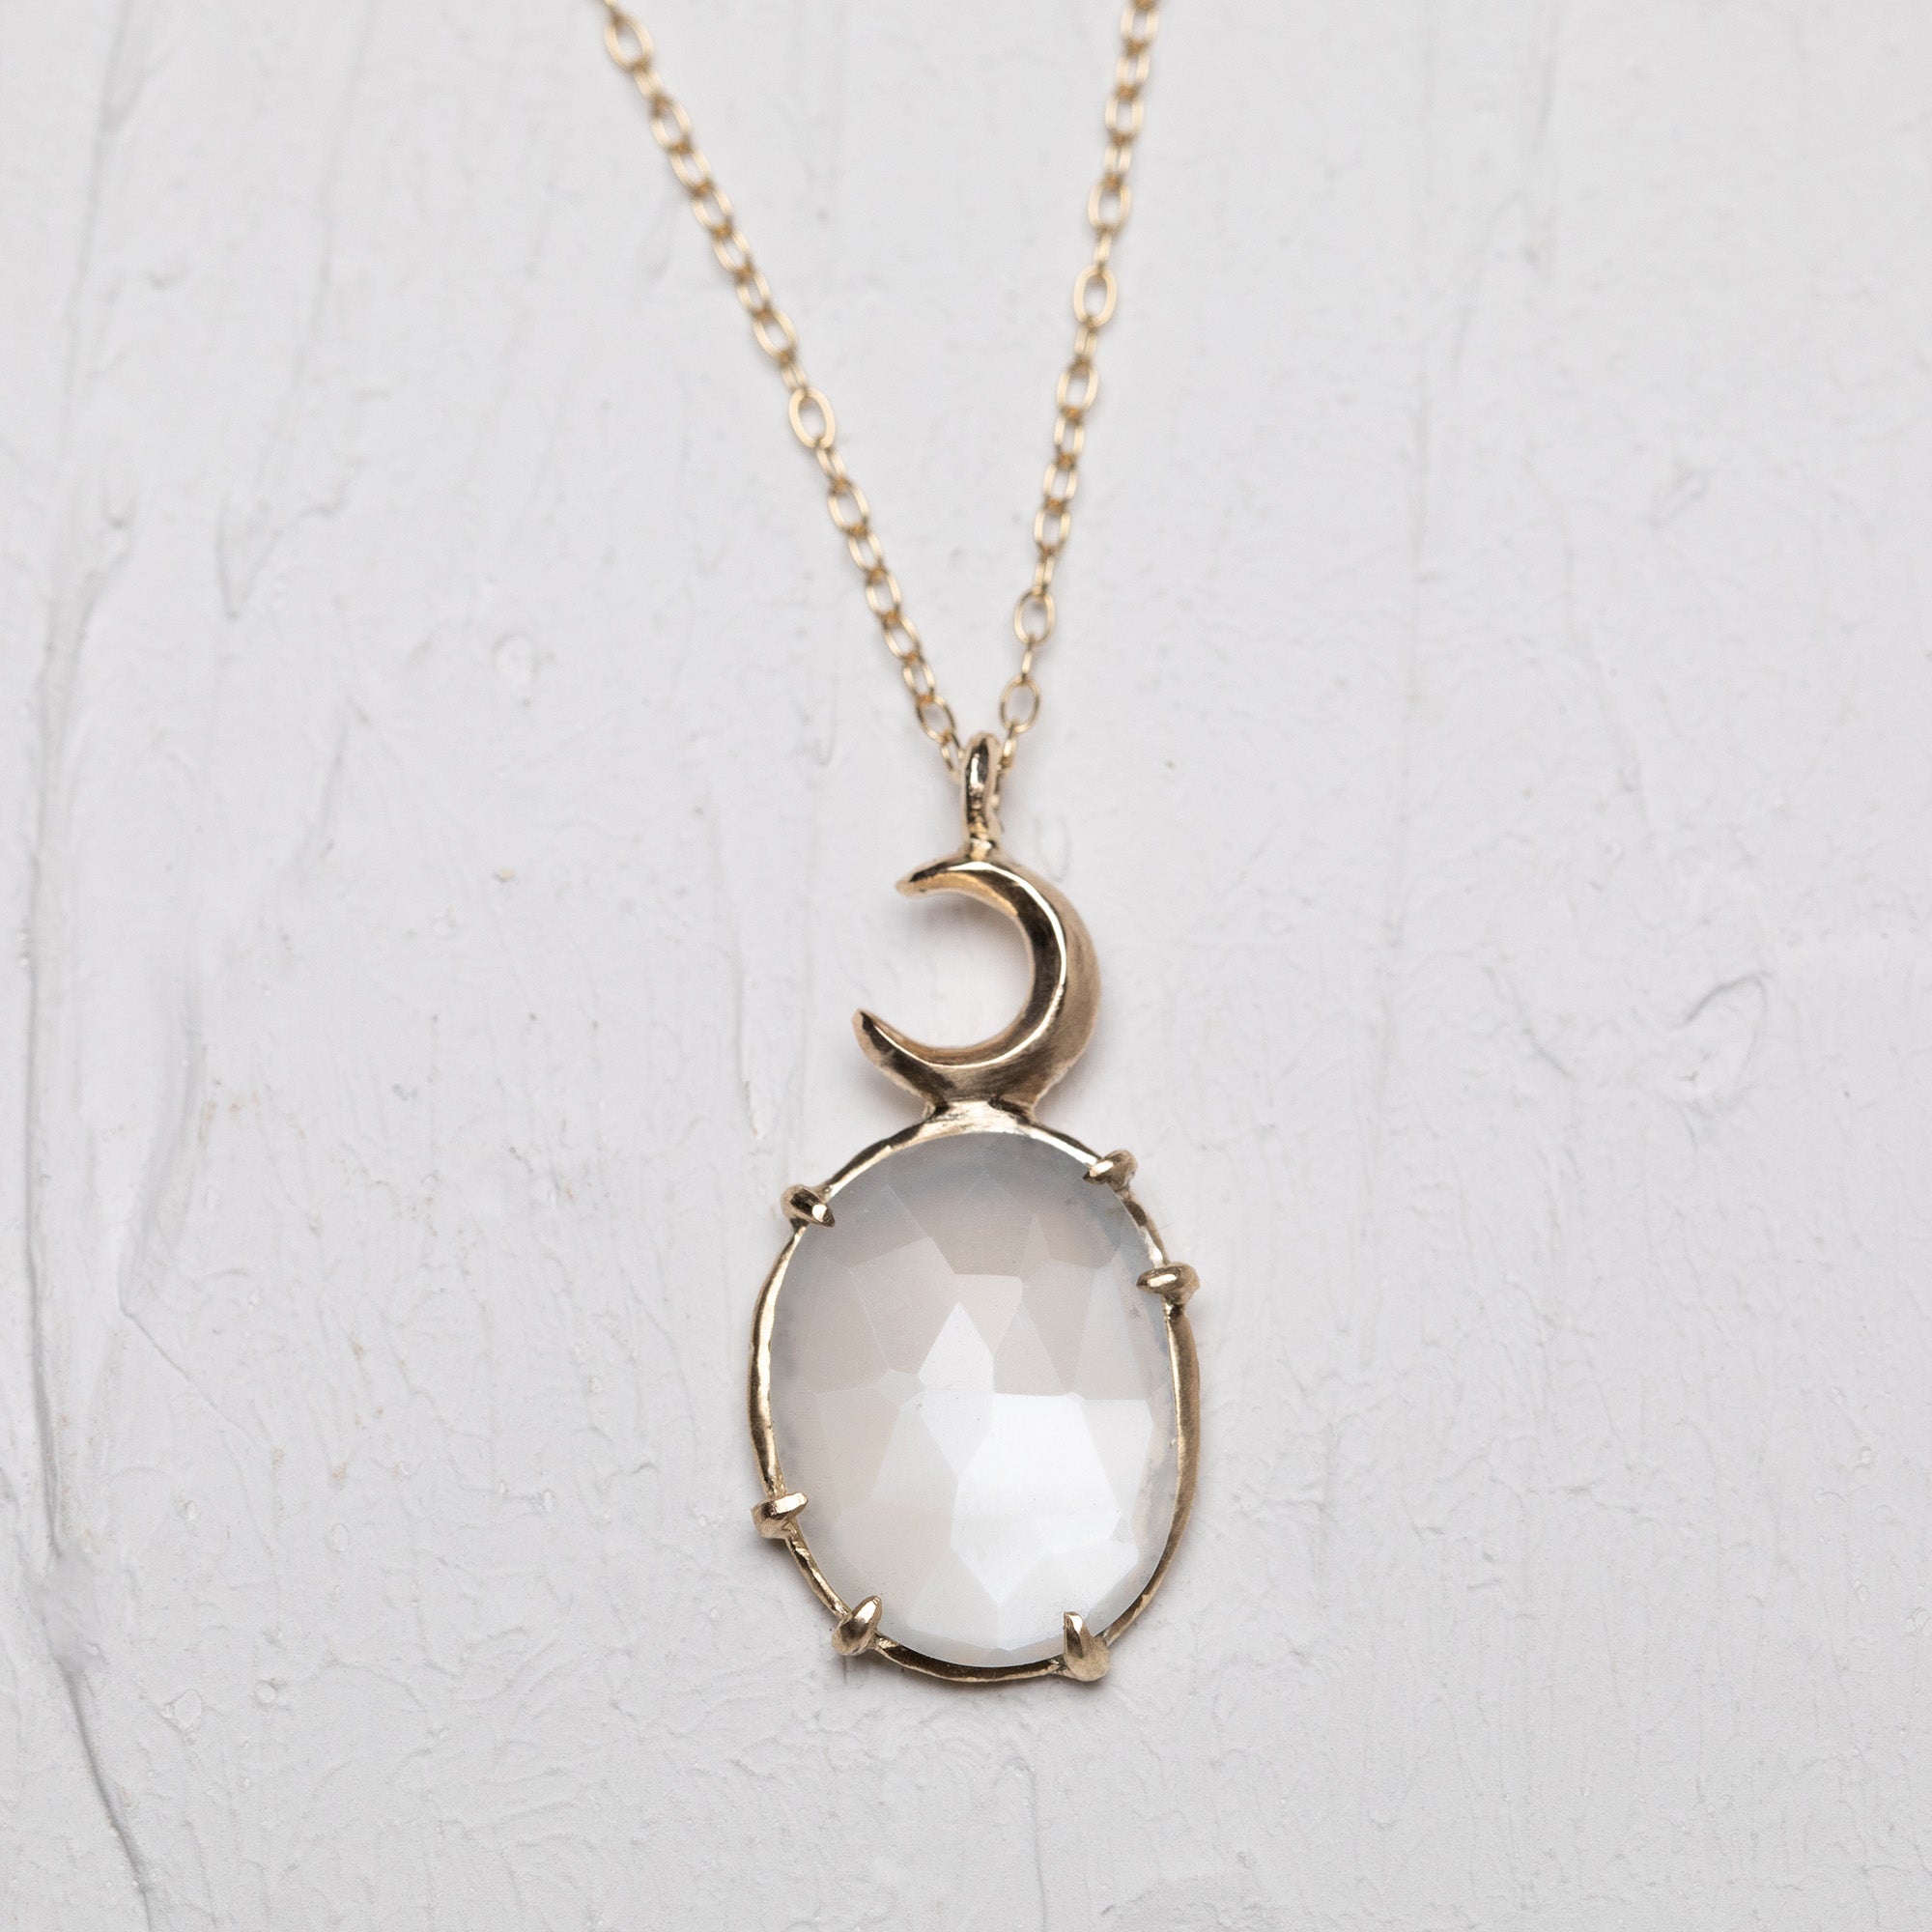 Crescent Moon Necklace with Moon Stone (10k)